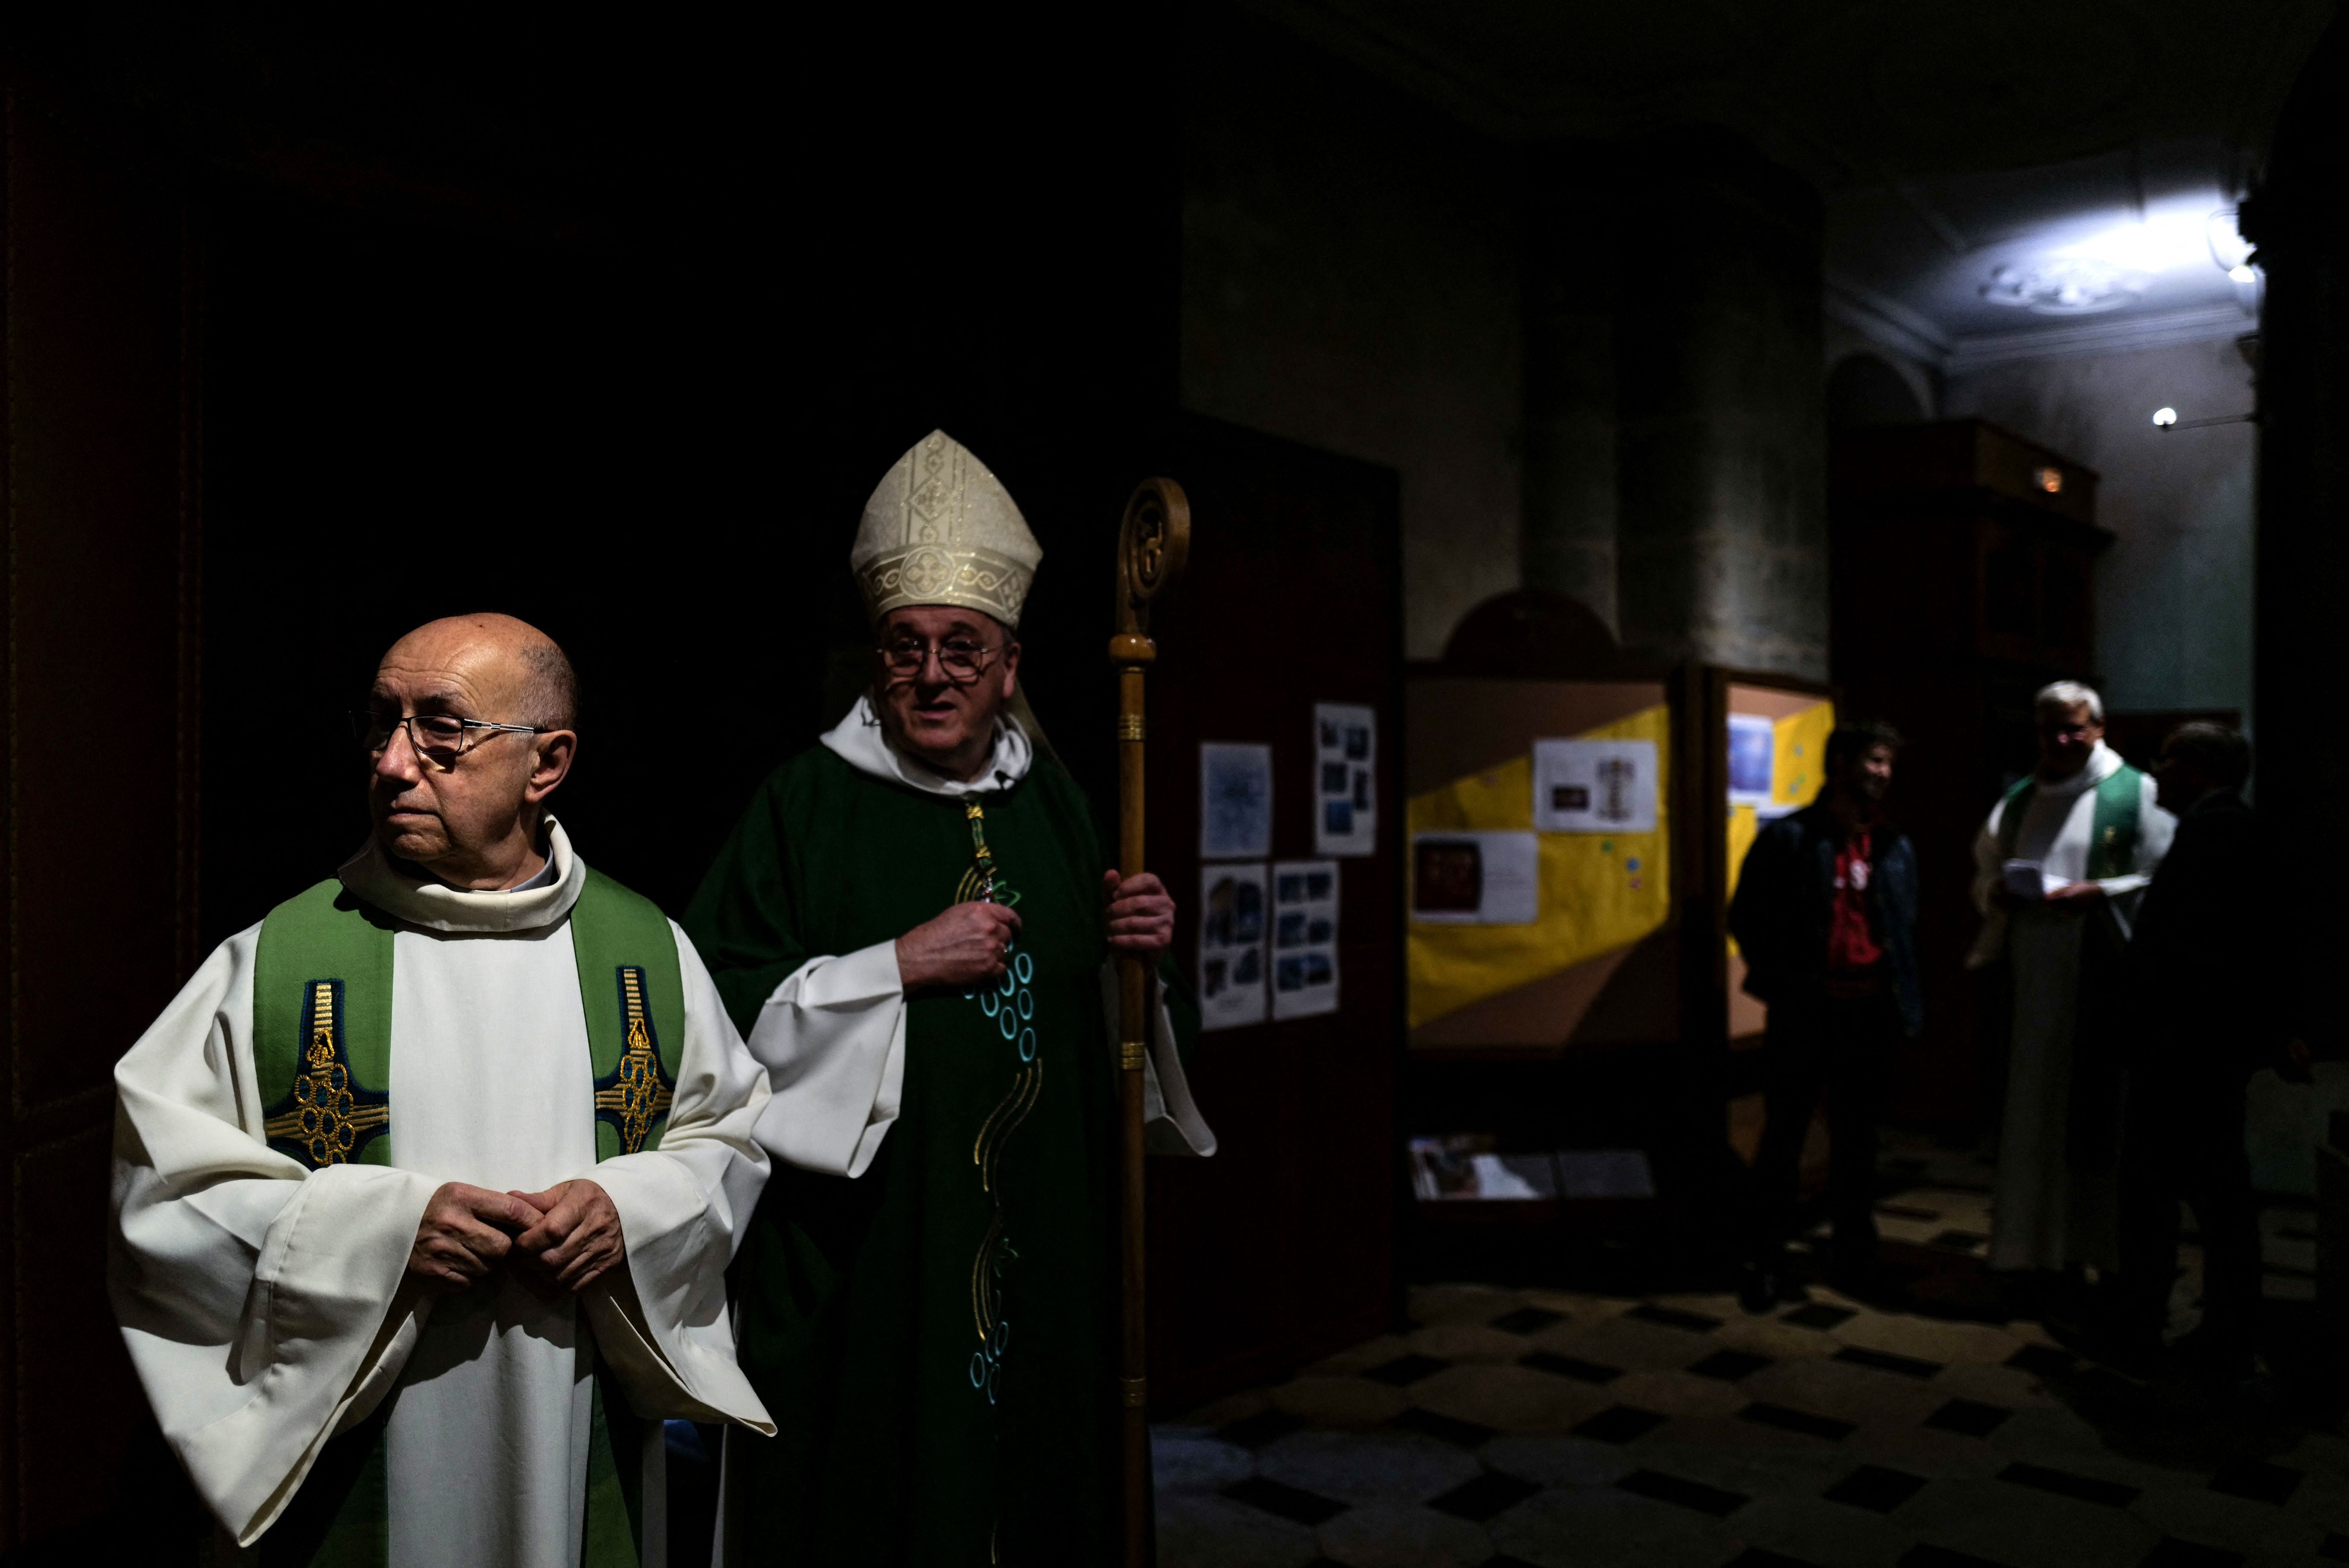 Father Didier Milani (L) speaks with Bishop Yves Le Saux (C) ahead of mass